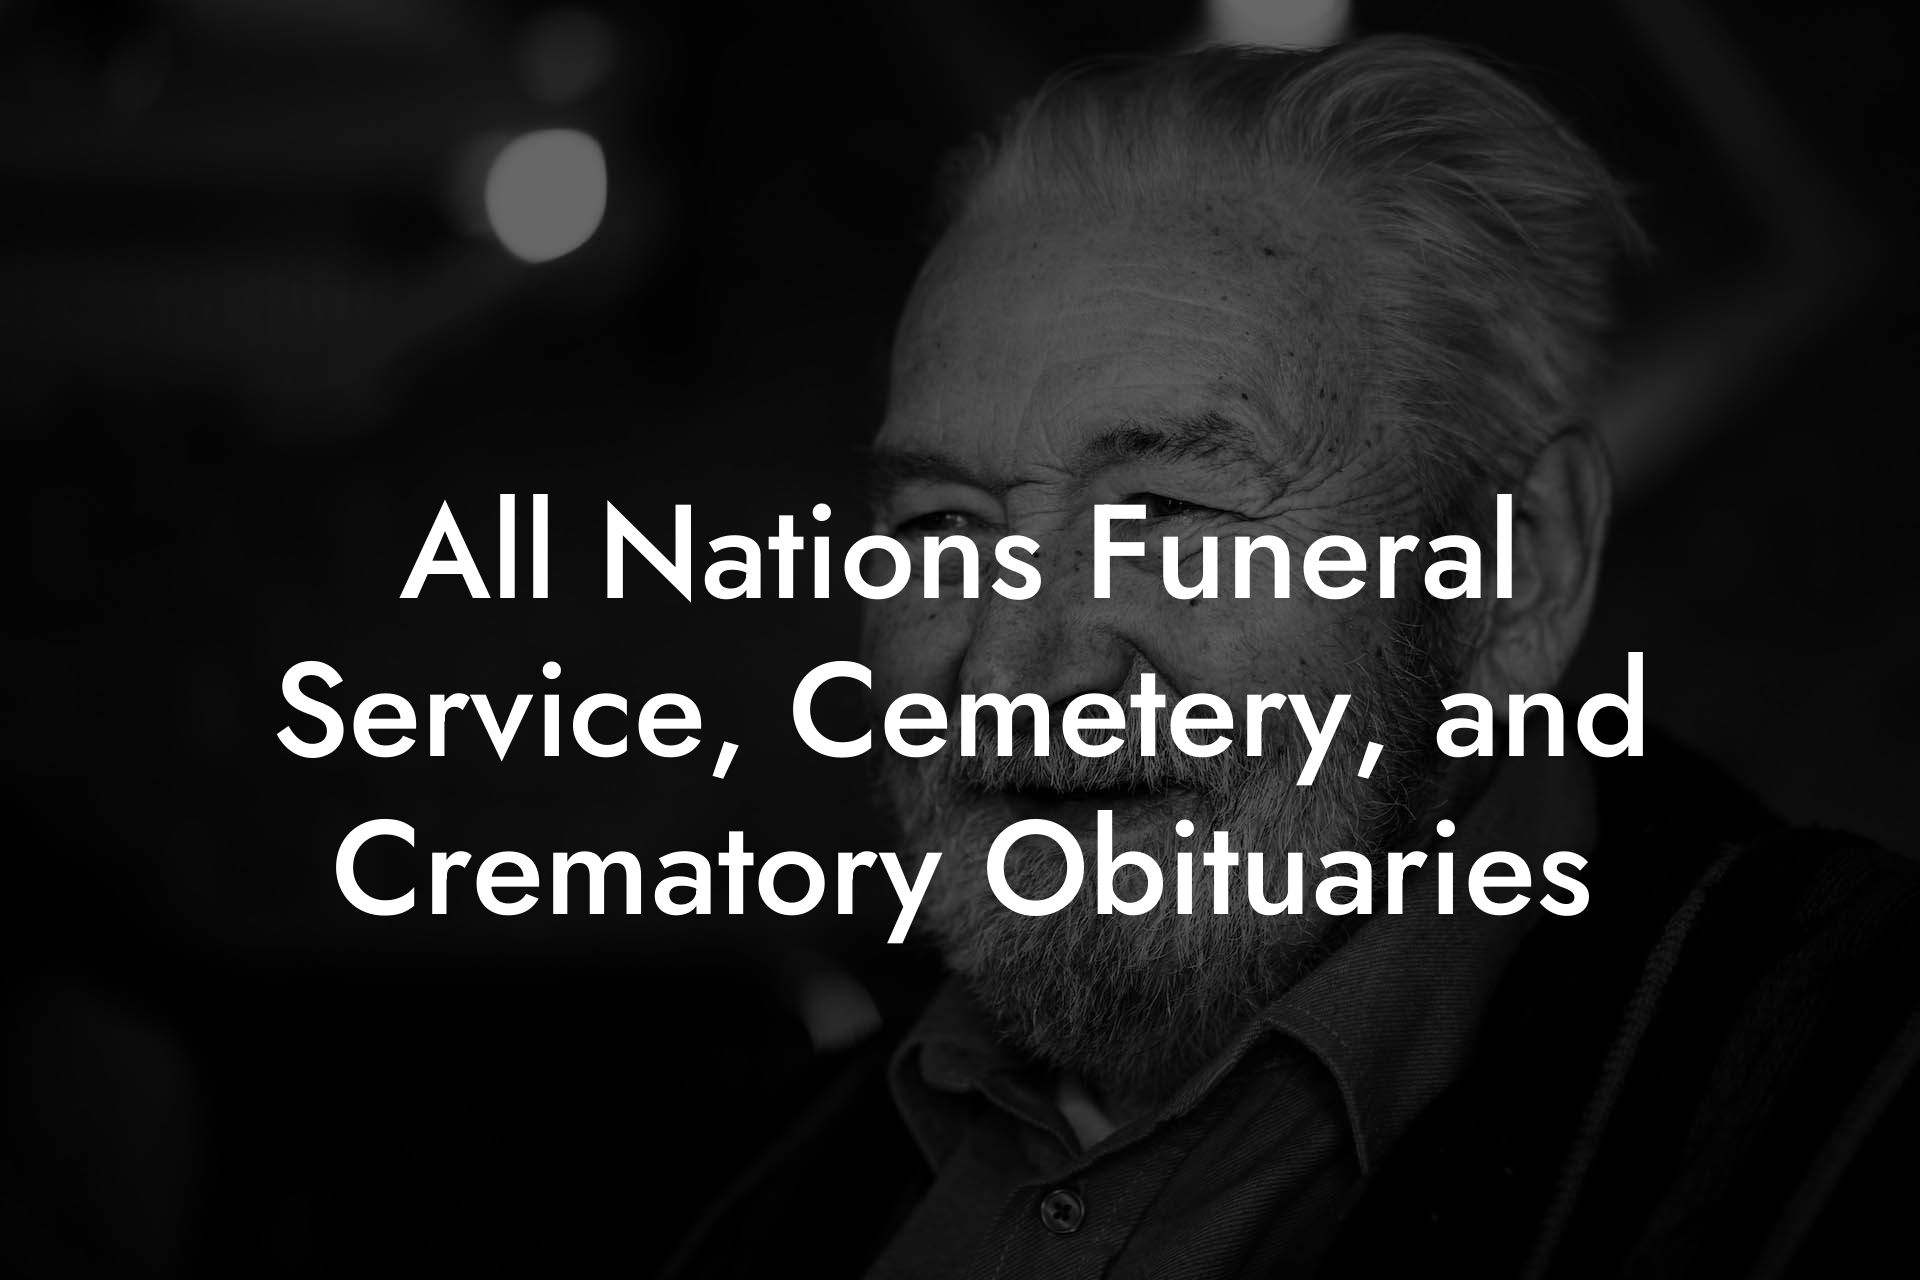 All Nations Funeral Service, Cemetery, and Crematory Obituaries